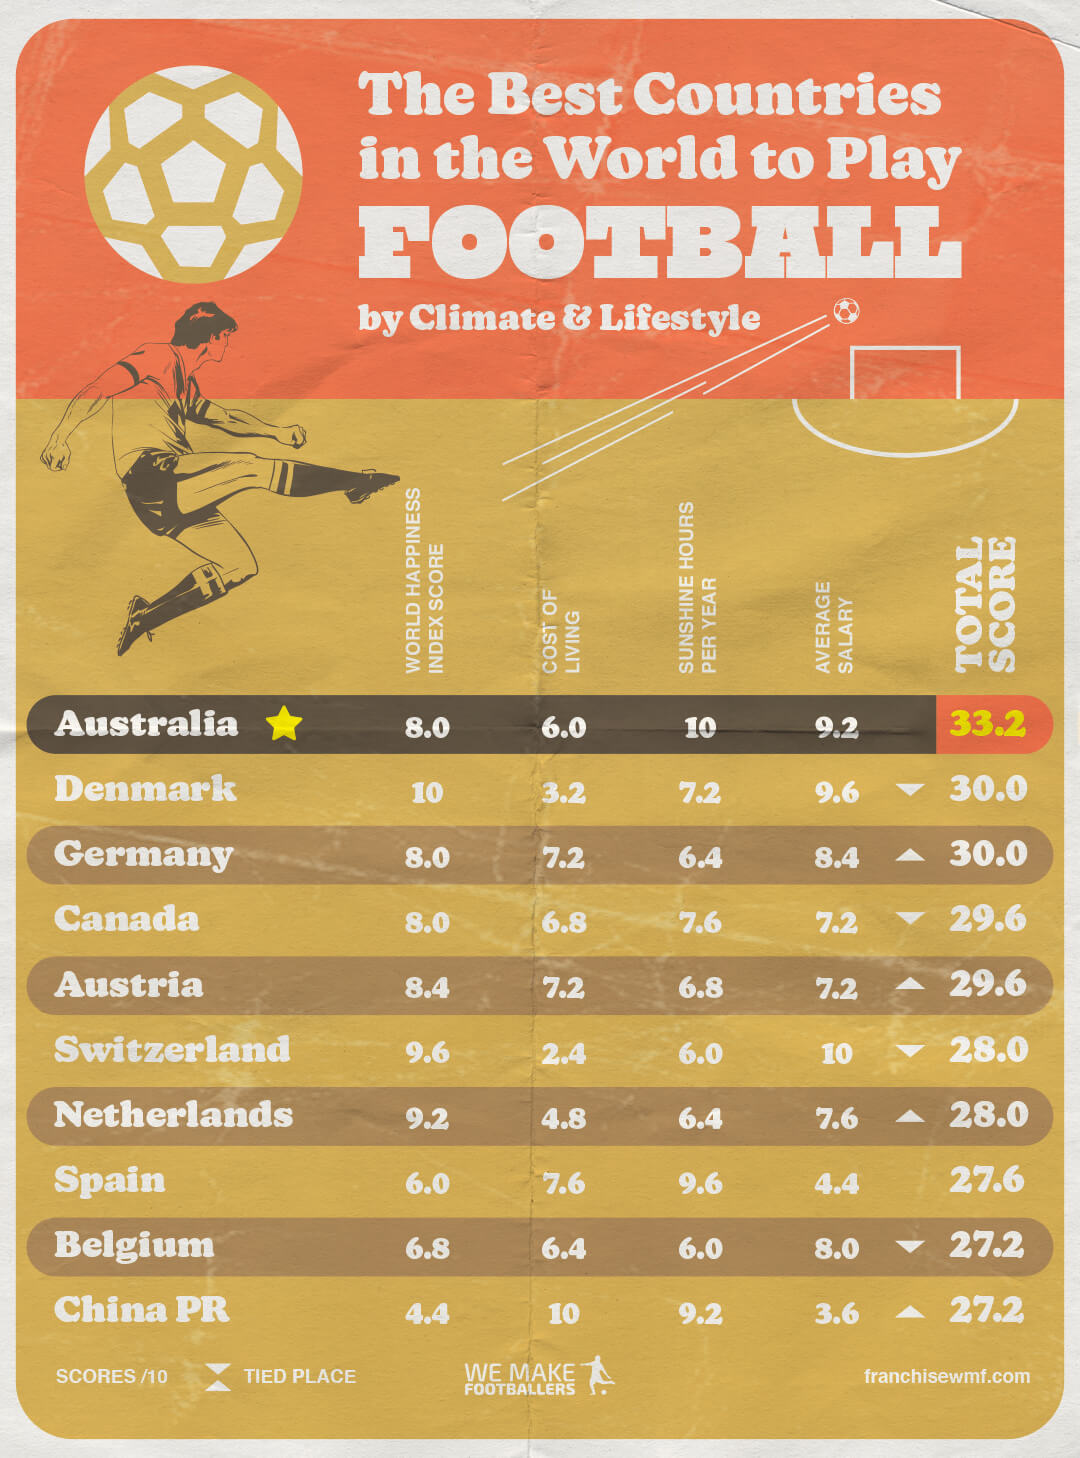 Image showing a league table ranking countries by footballing culture and heritage. England is at the top.